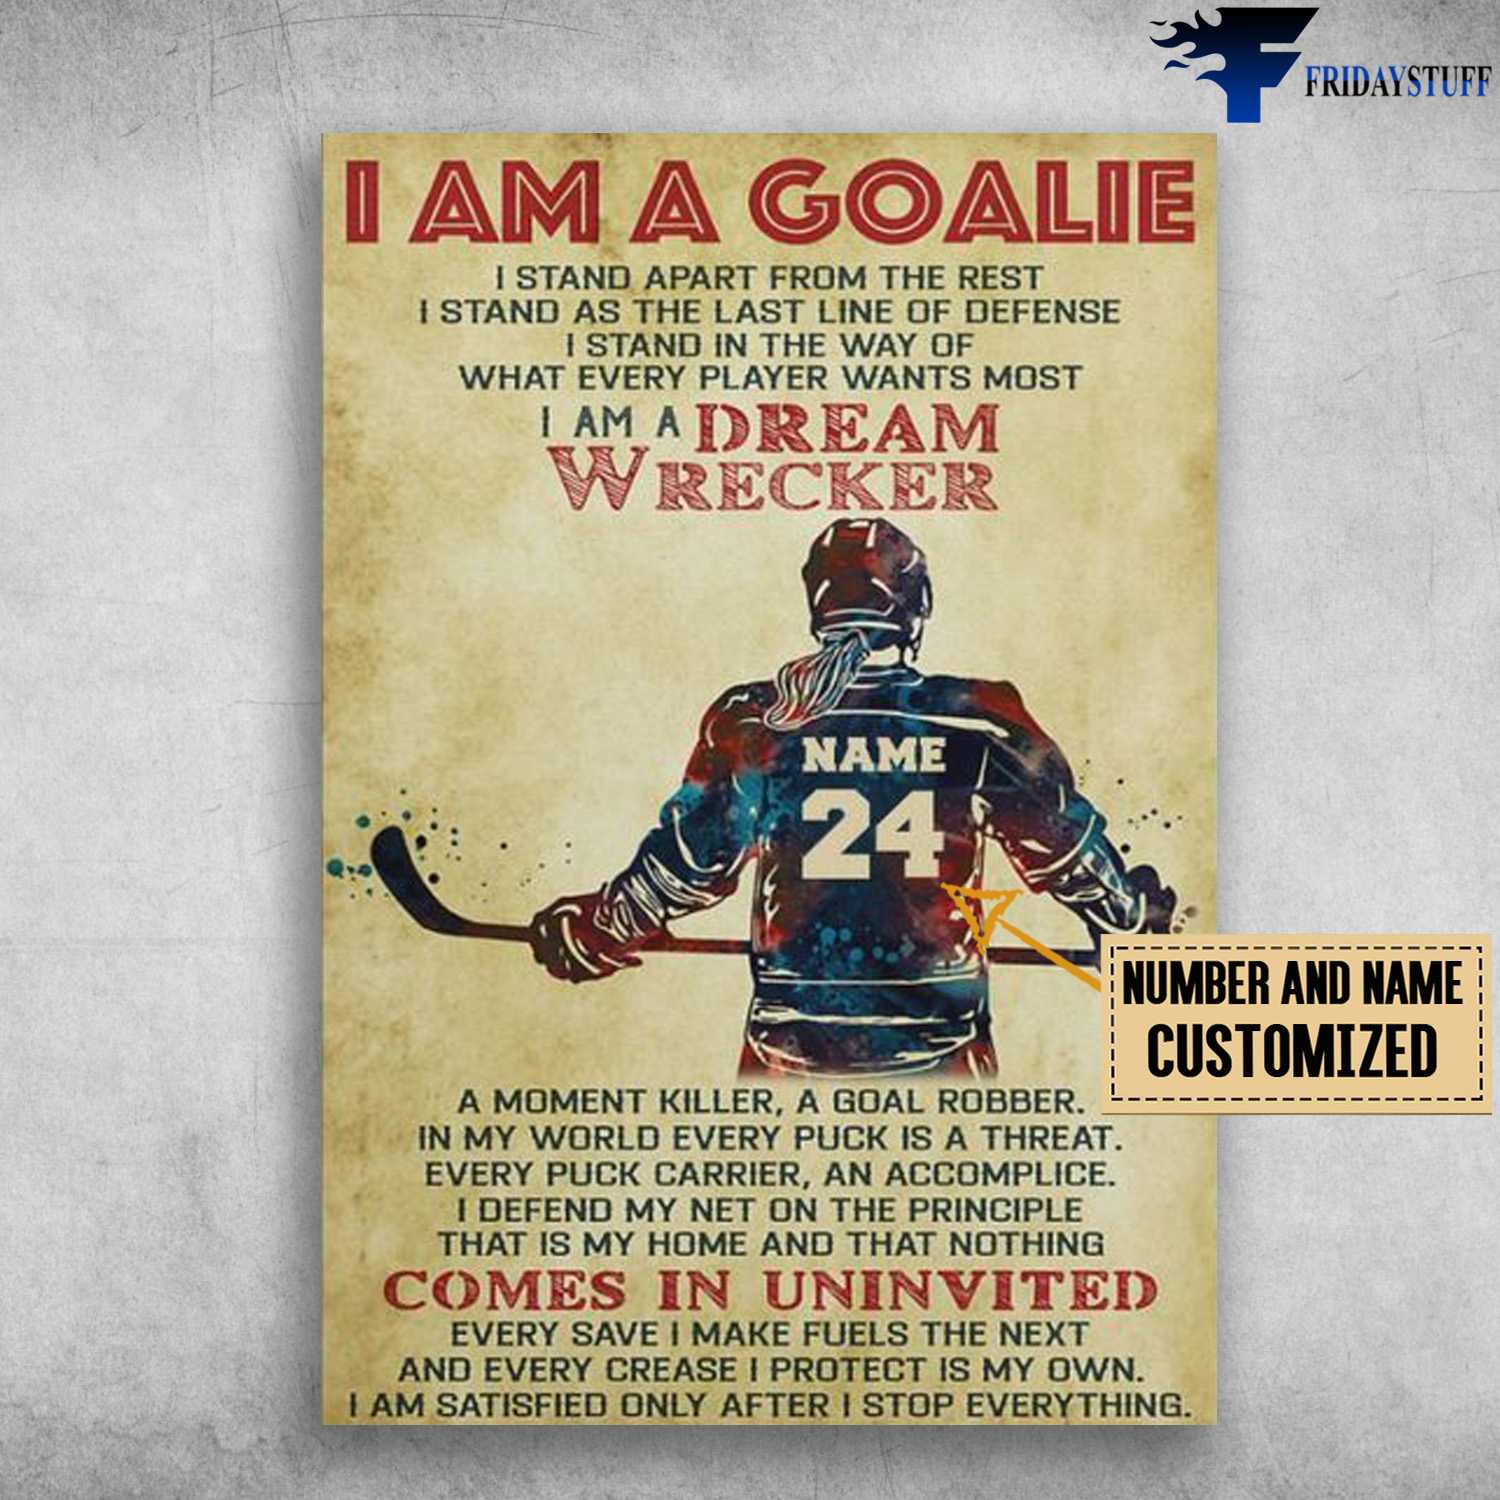 Hockey Poster, Hockey Goalie, I Am A Goalie, I Stand Apart From The Rest, I Stand As The Last Line Of Defense, I Stand In The Way Of, Waht Every Player Wants Most, I Am A Dream Wreaker